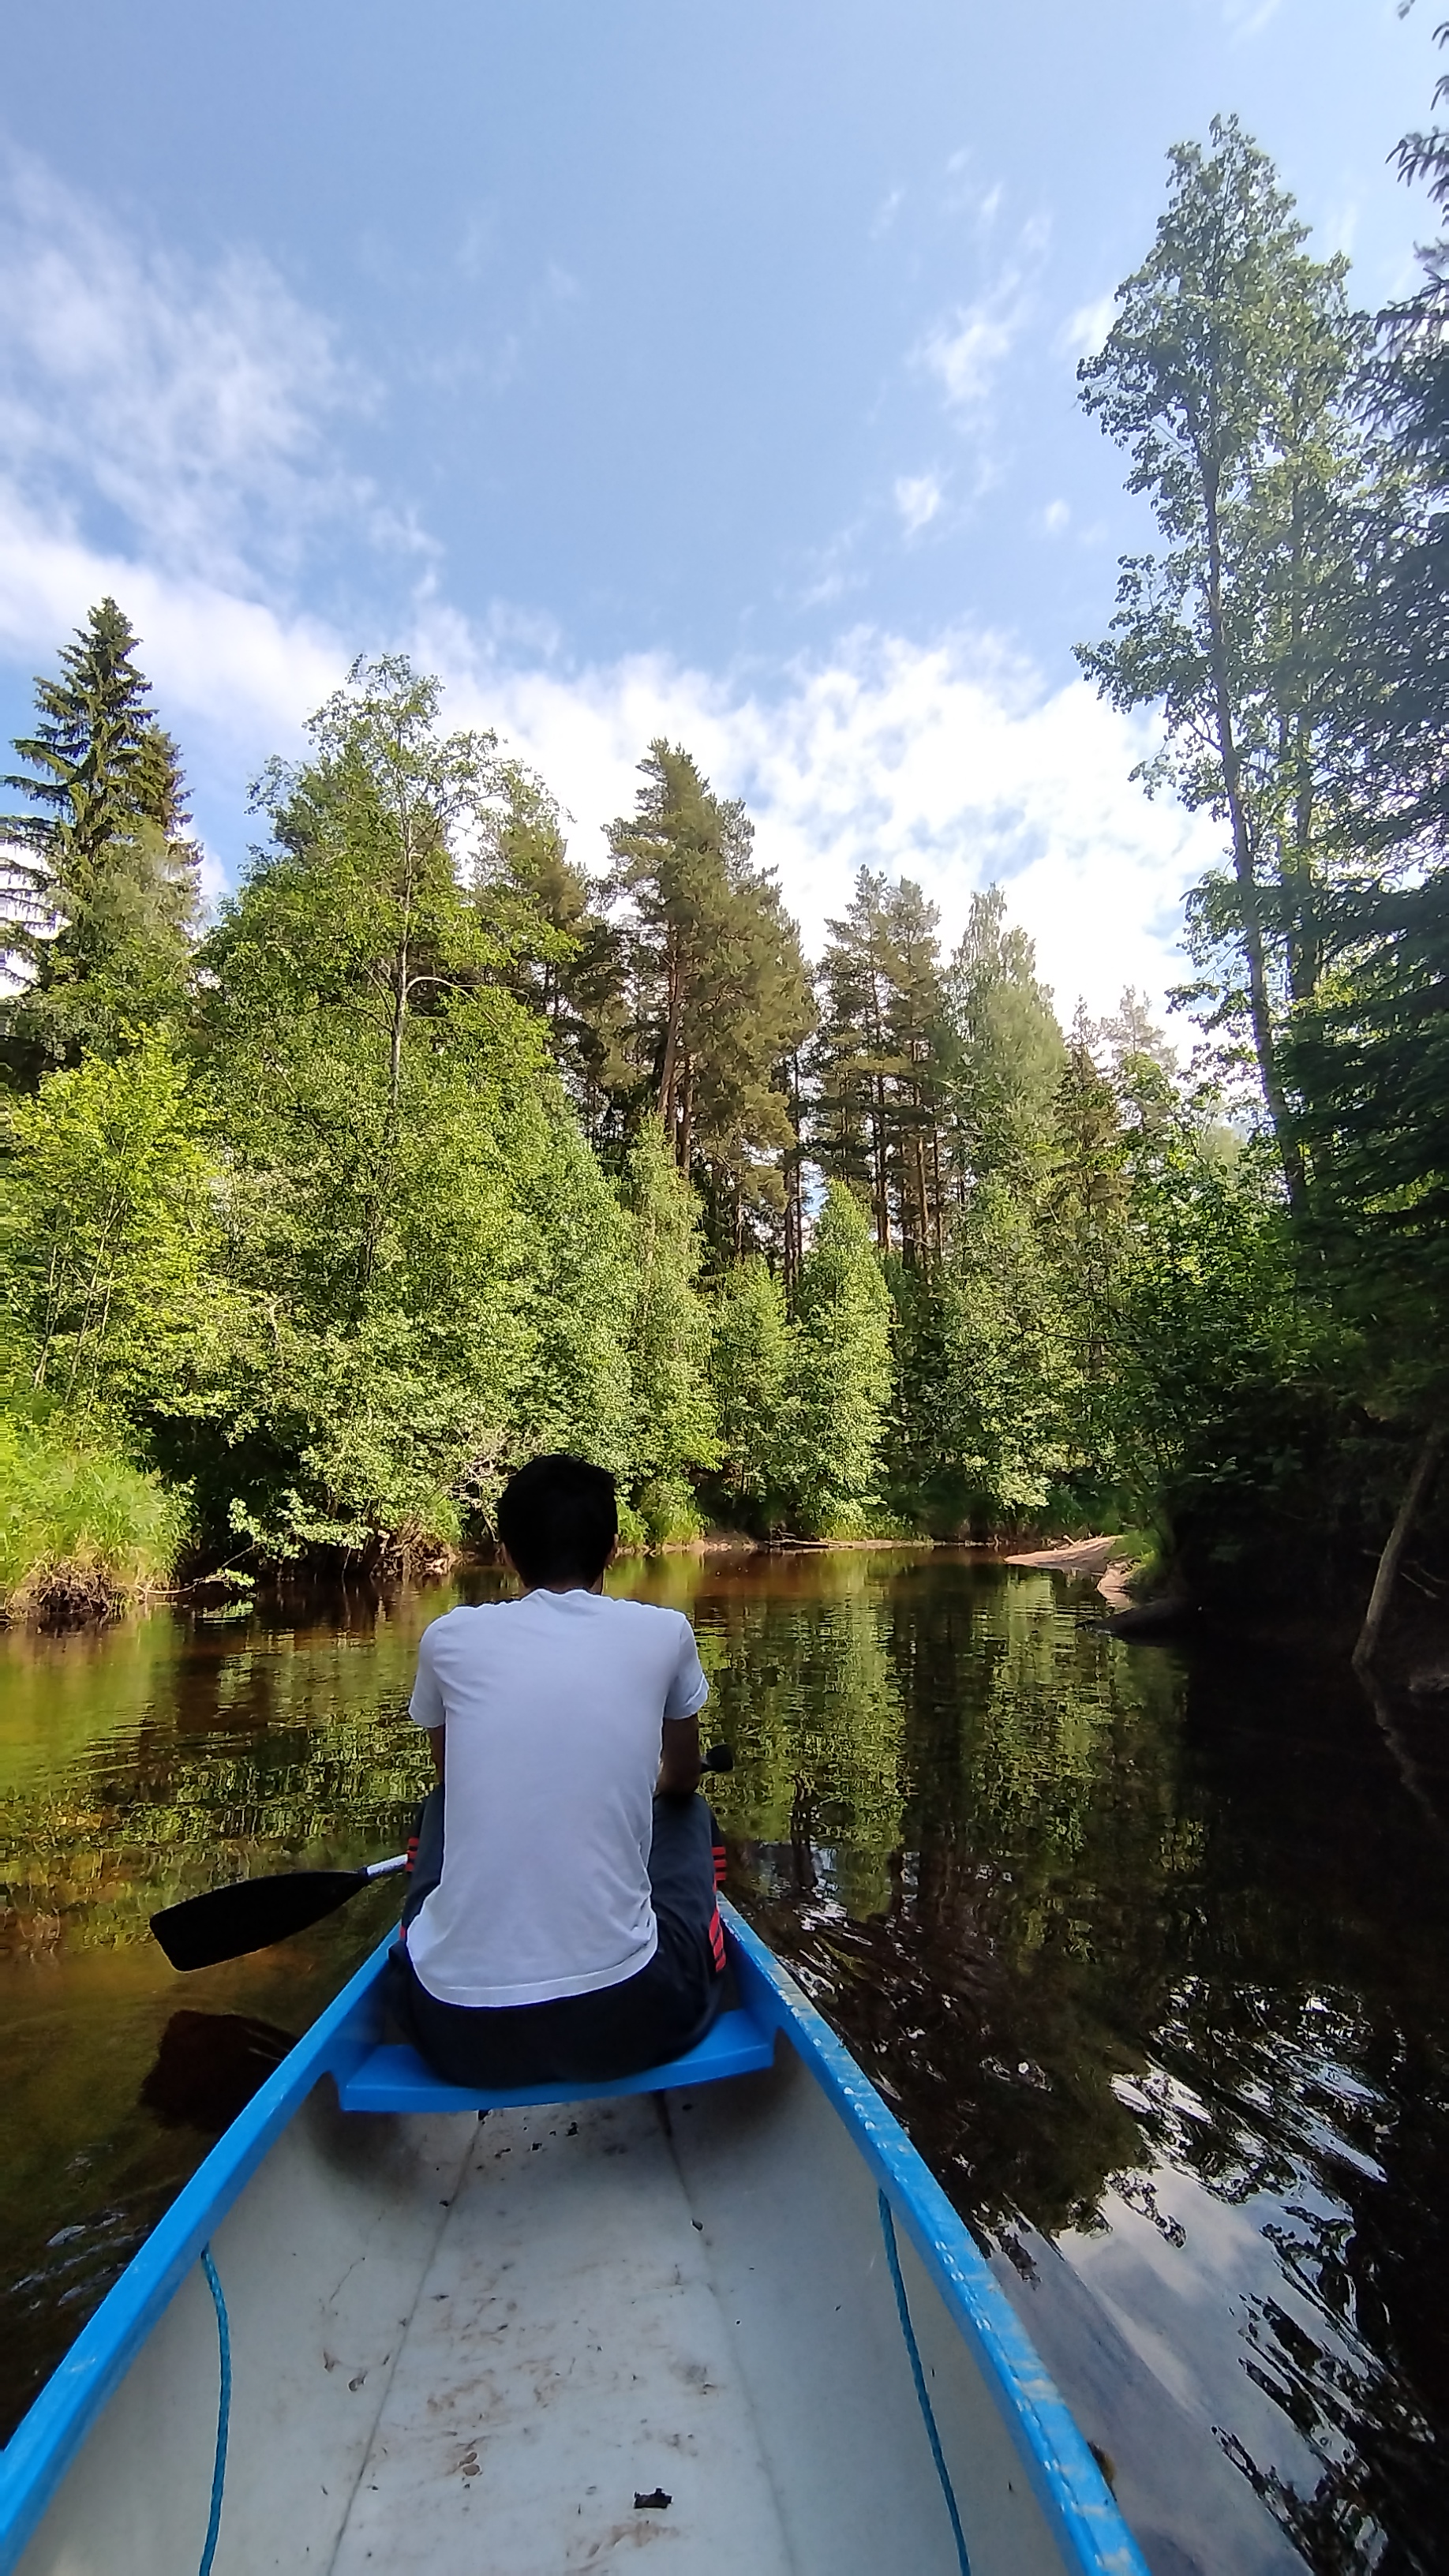 Canoeing through the rivers and forests of Dalarna, Sweden